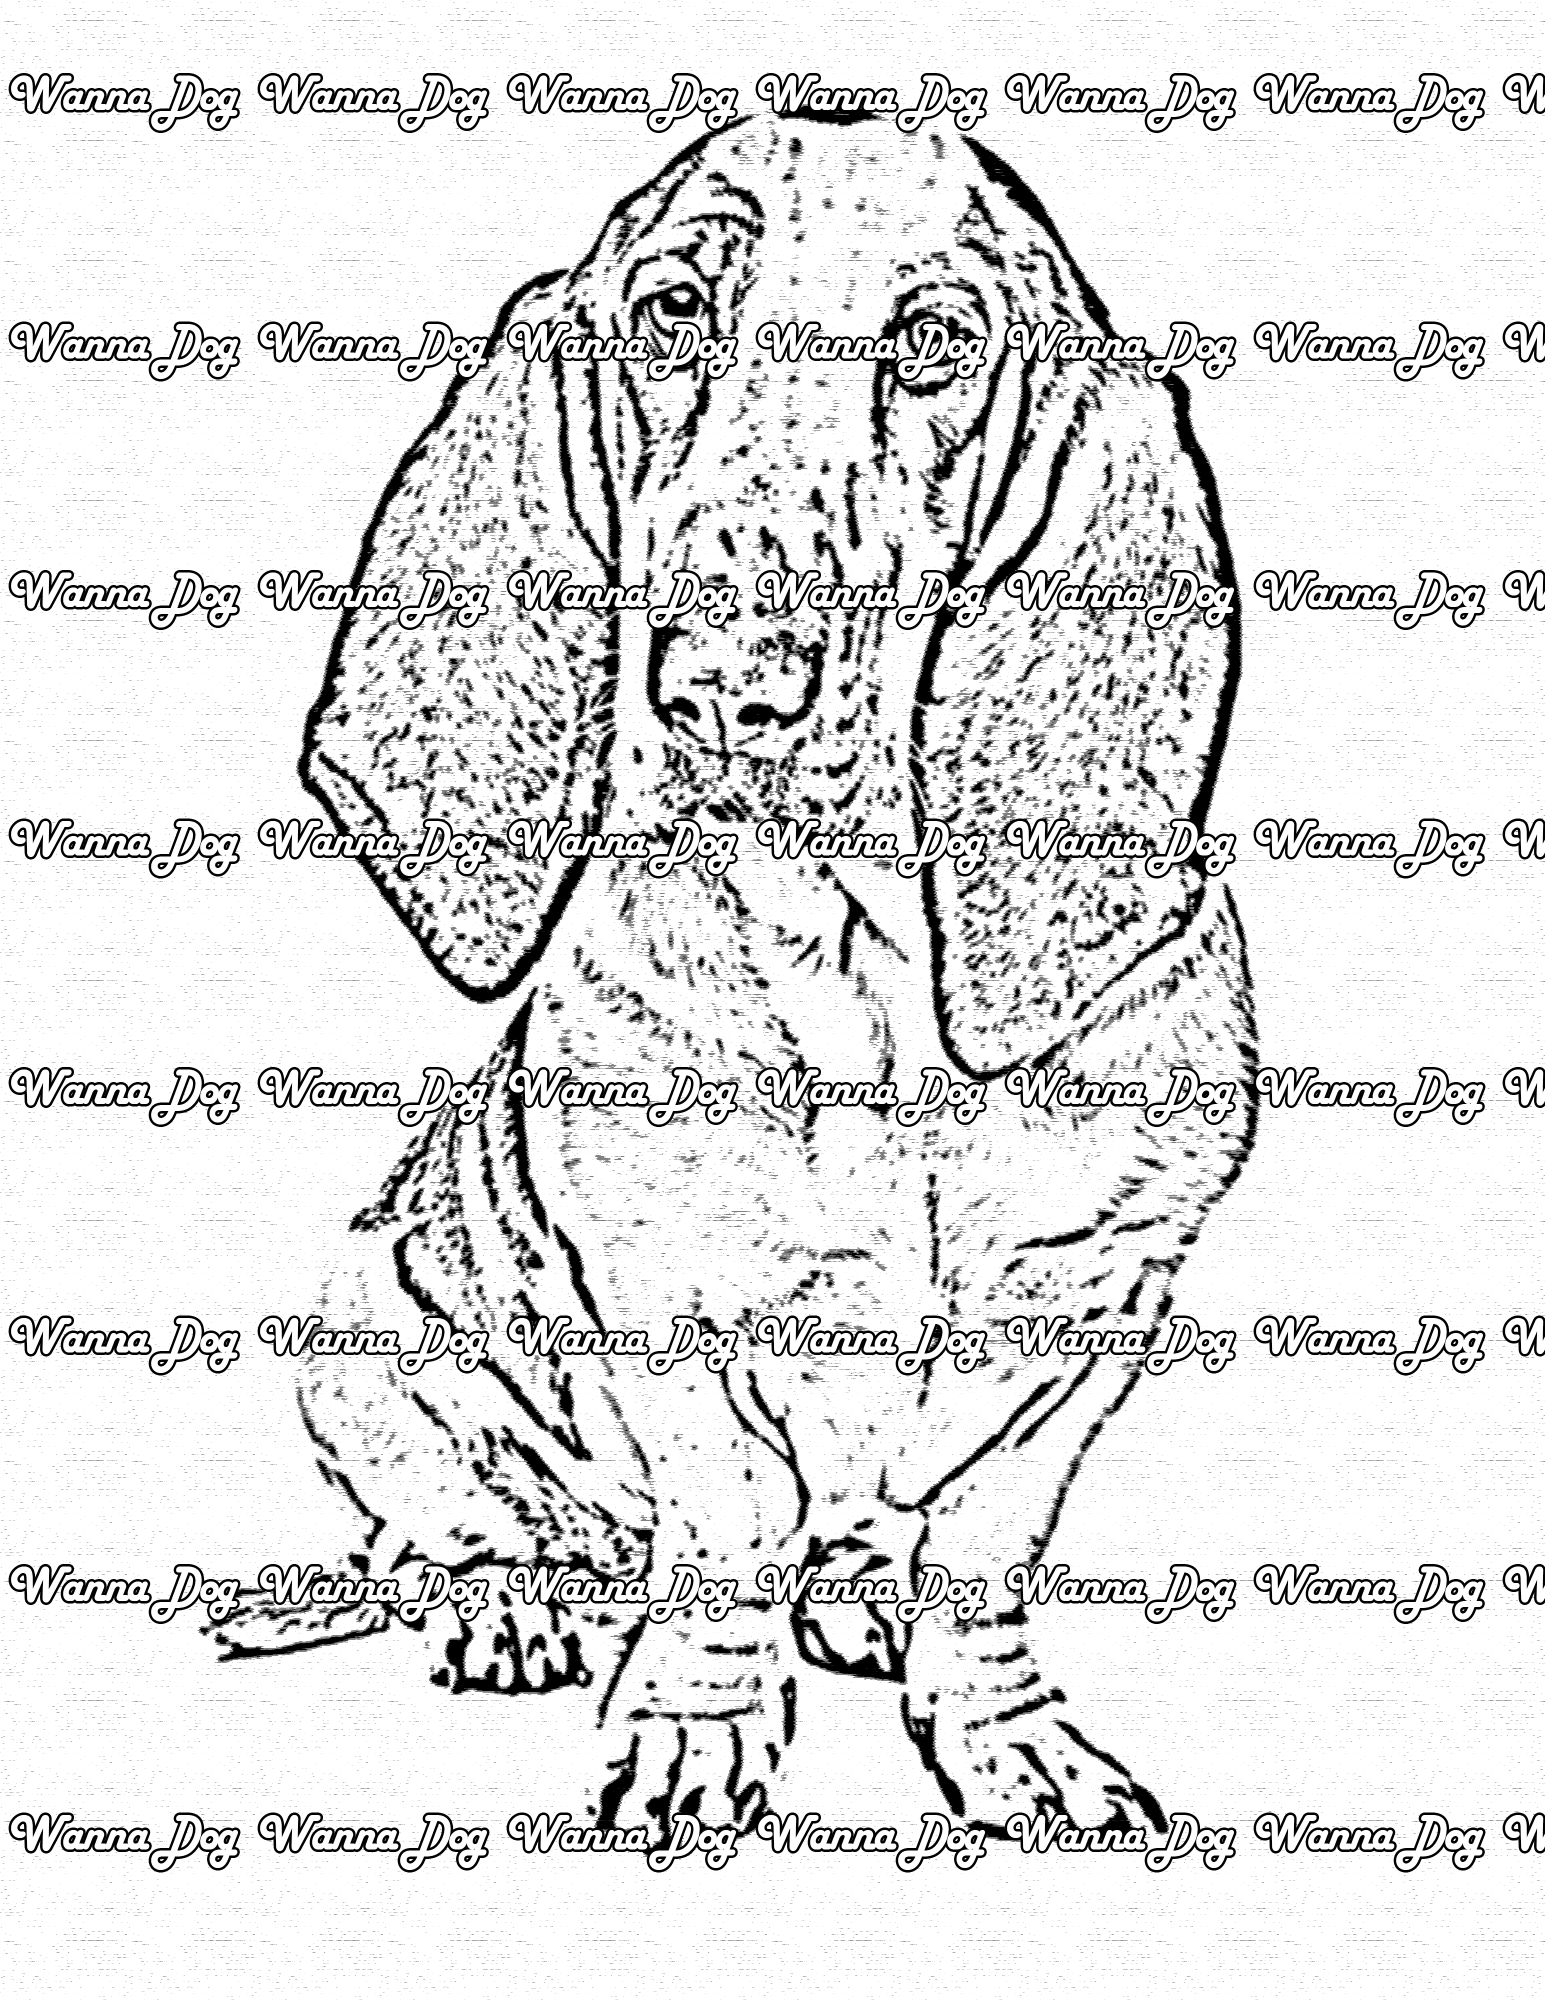 Basset Hound Coloring Page of a Basset Hound staring into the camera